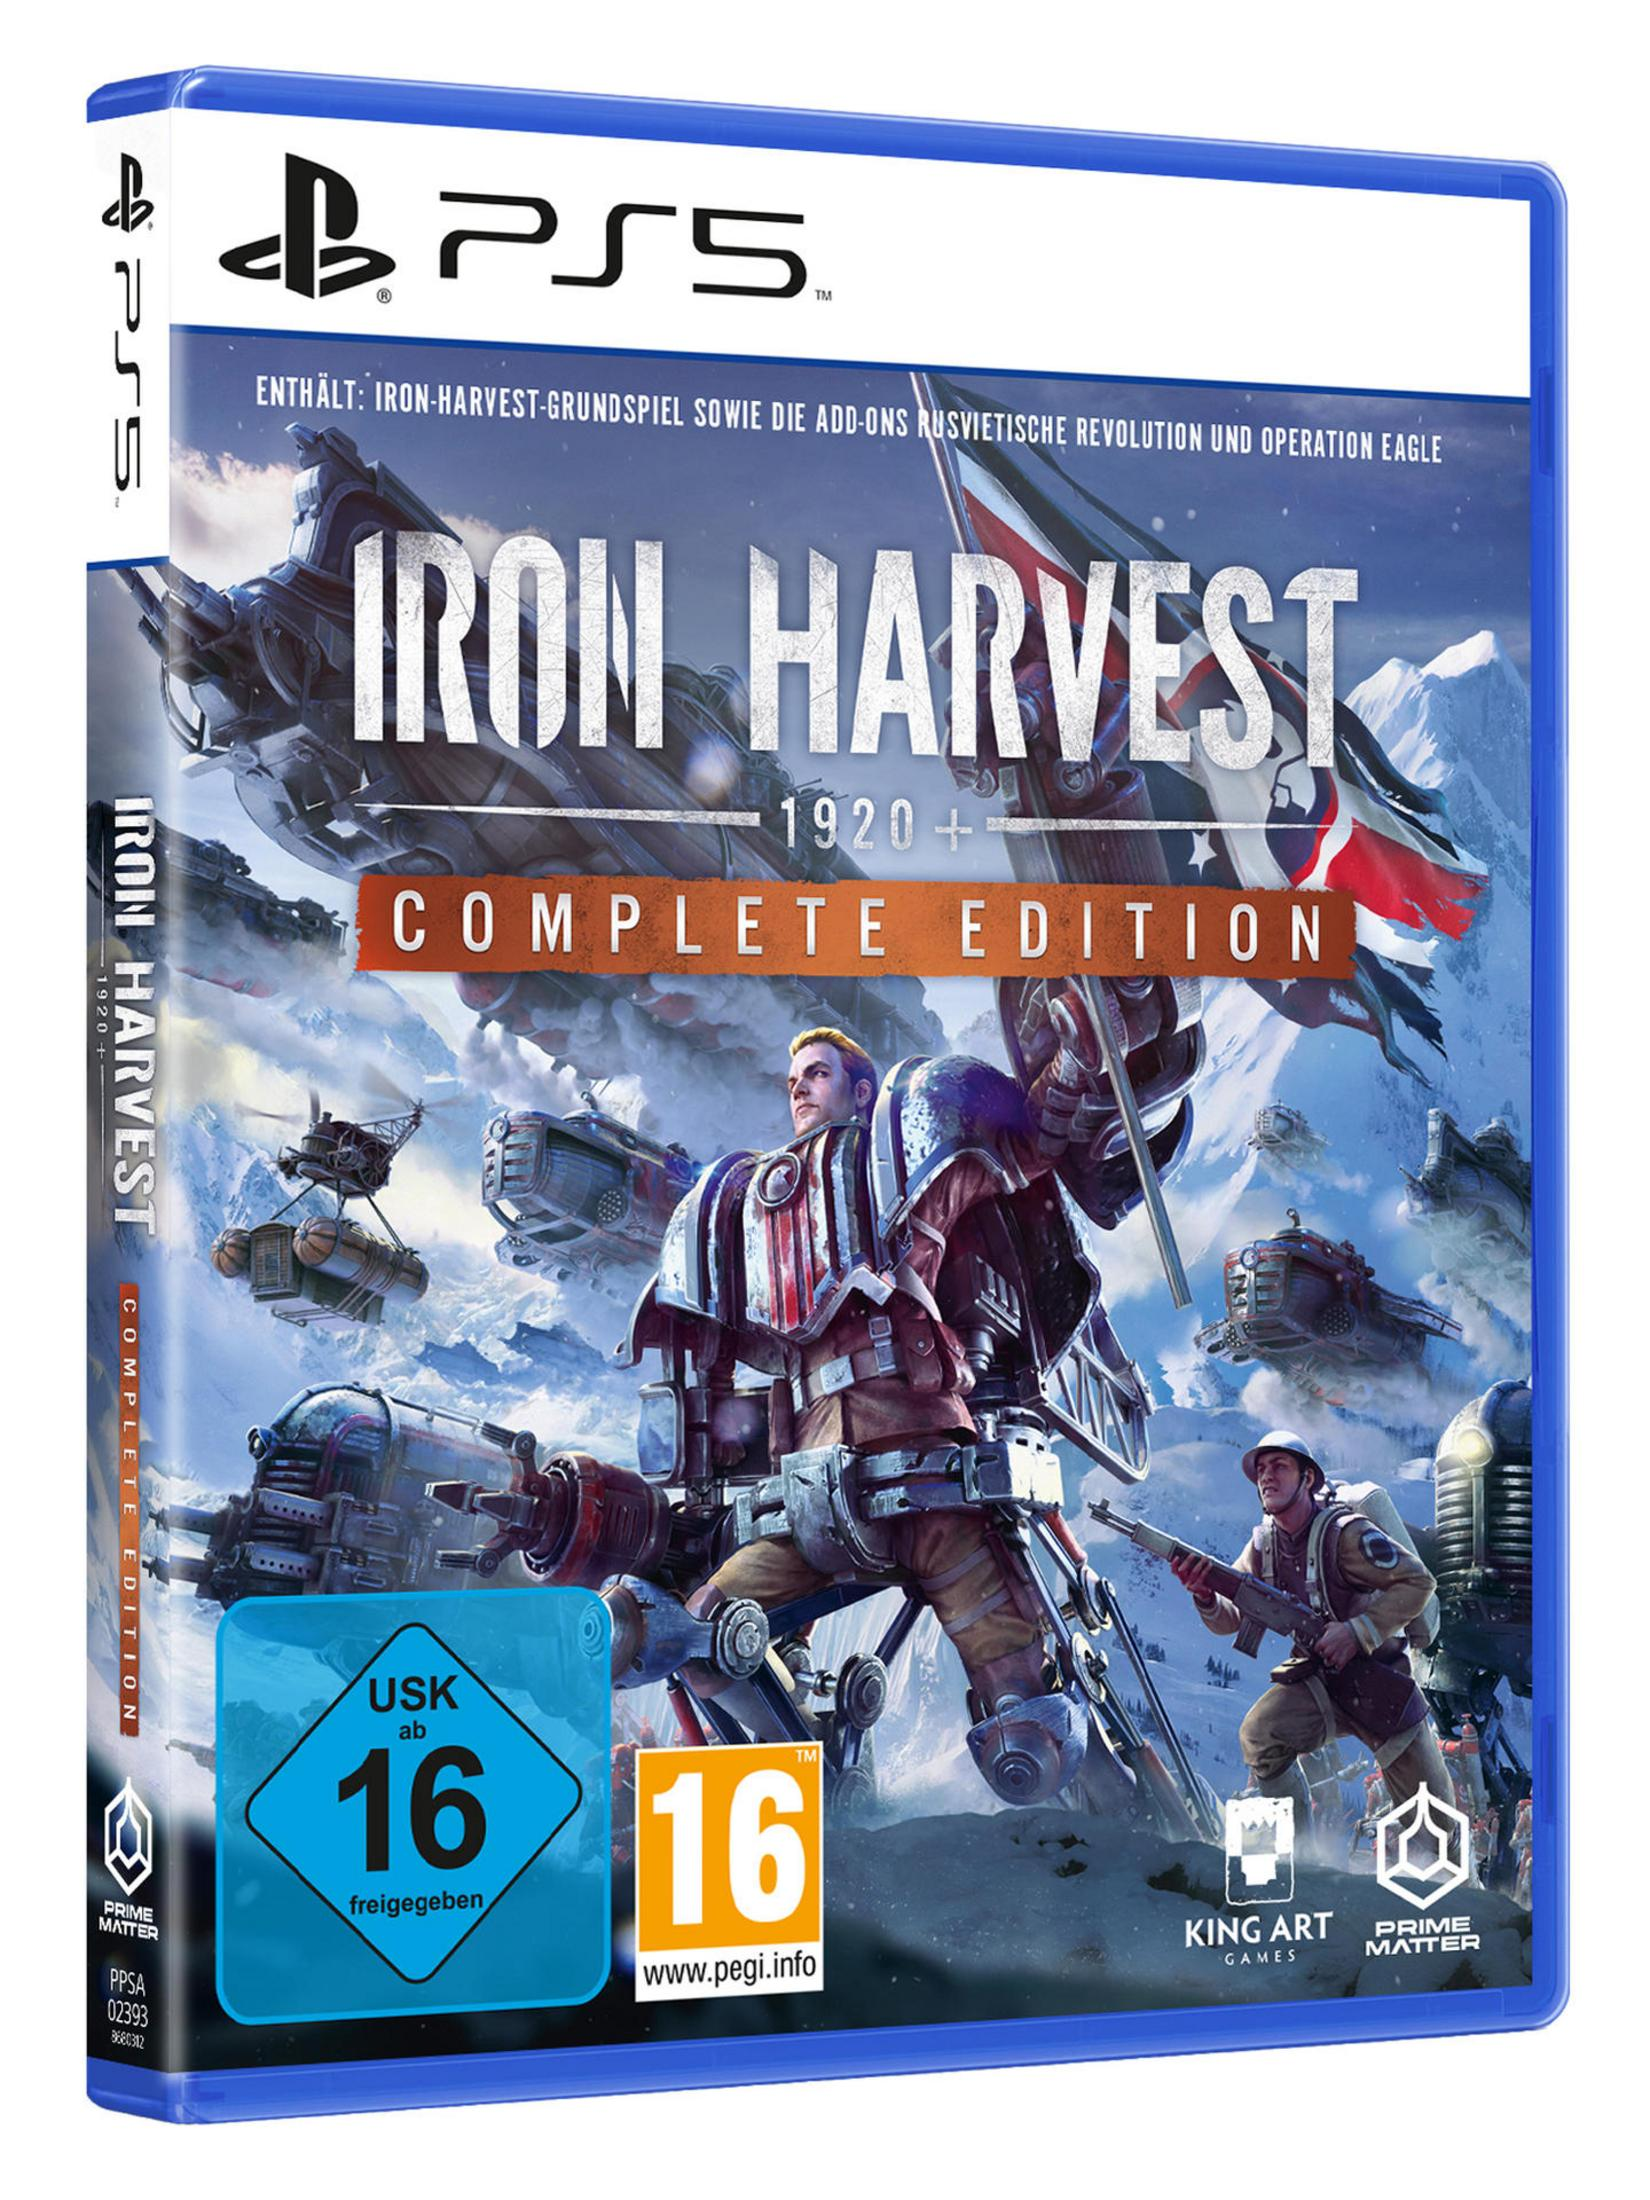 Iron Harvest Edition - Complete 5] [PlayStation 